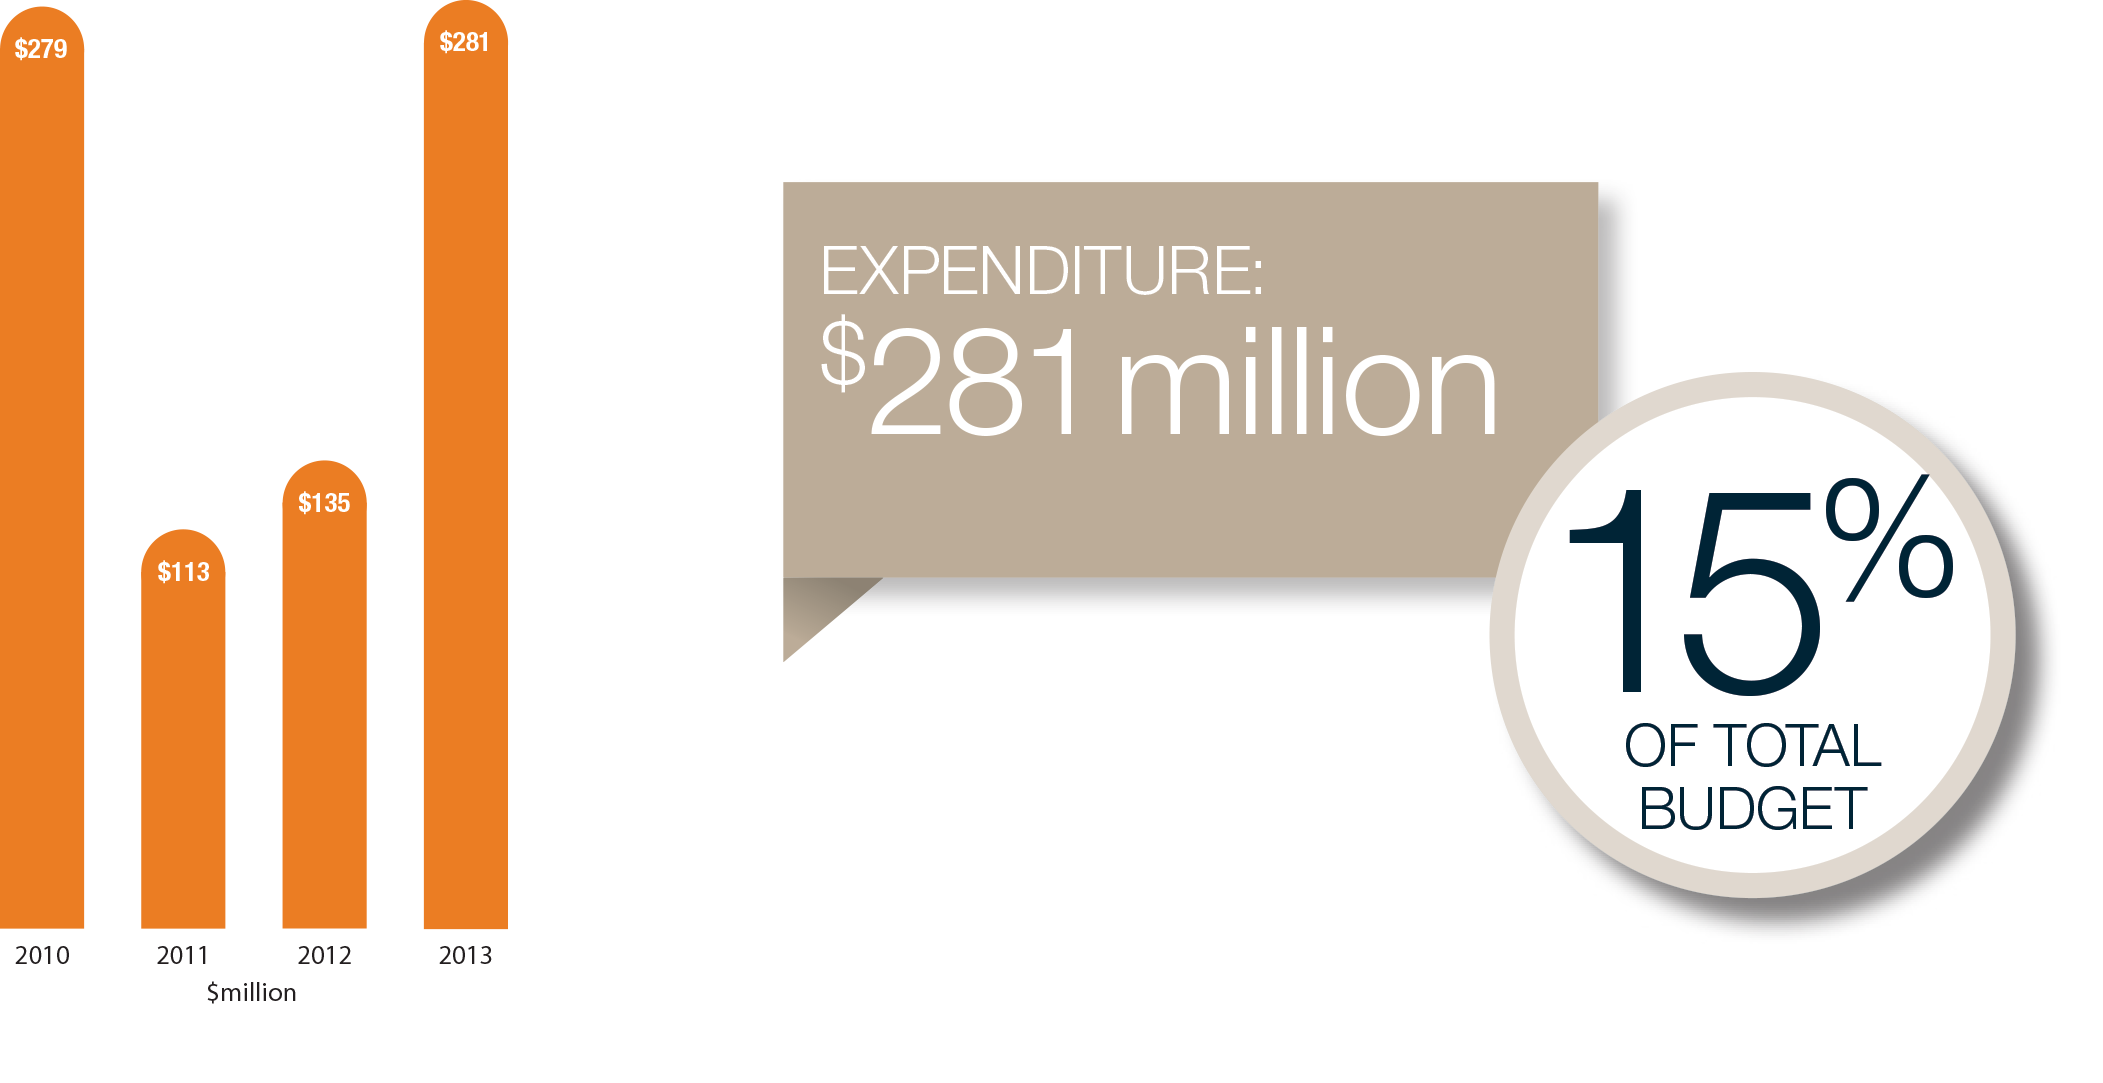 Expenditure in 2013 was $281 million or 15% of the total budget